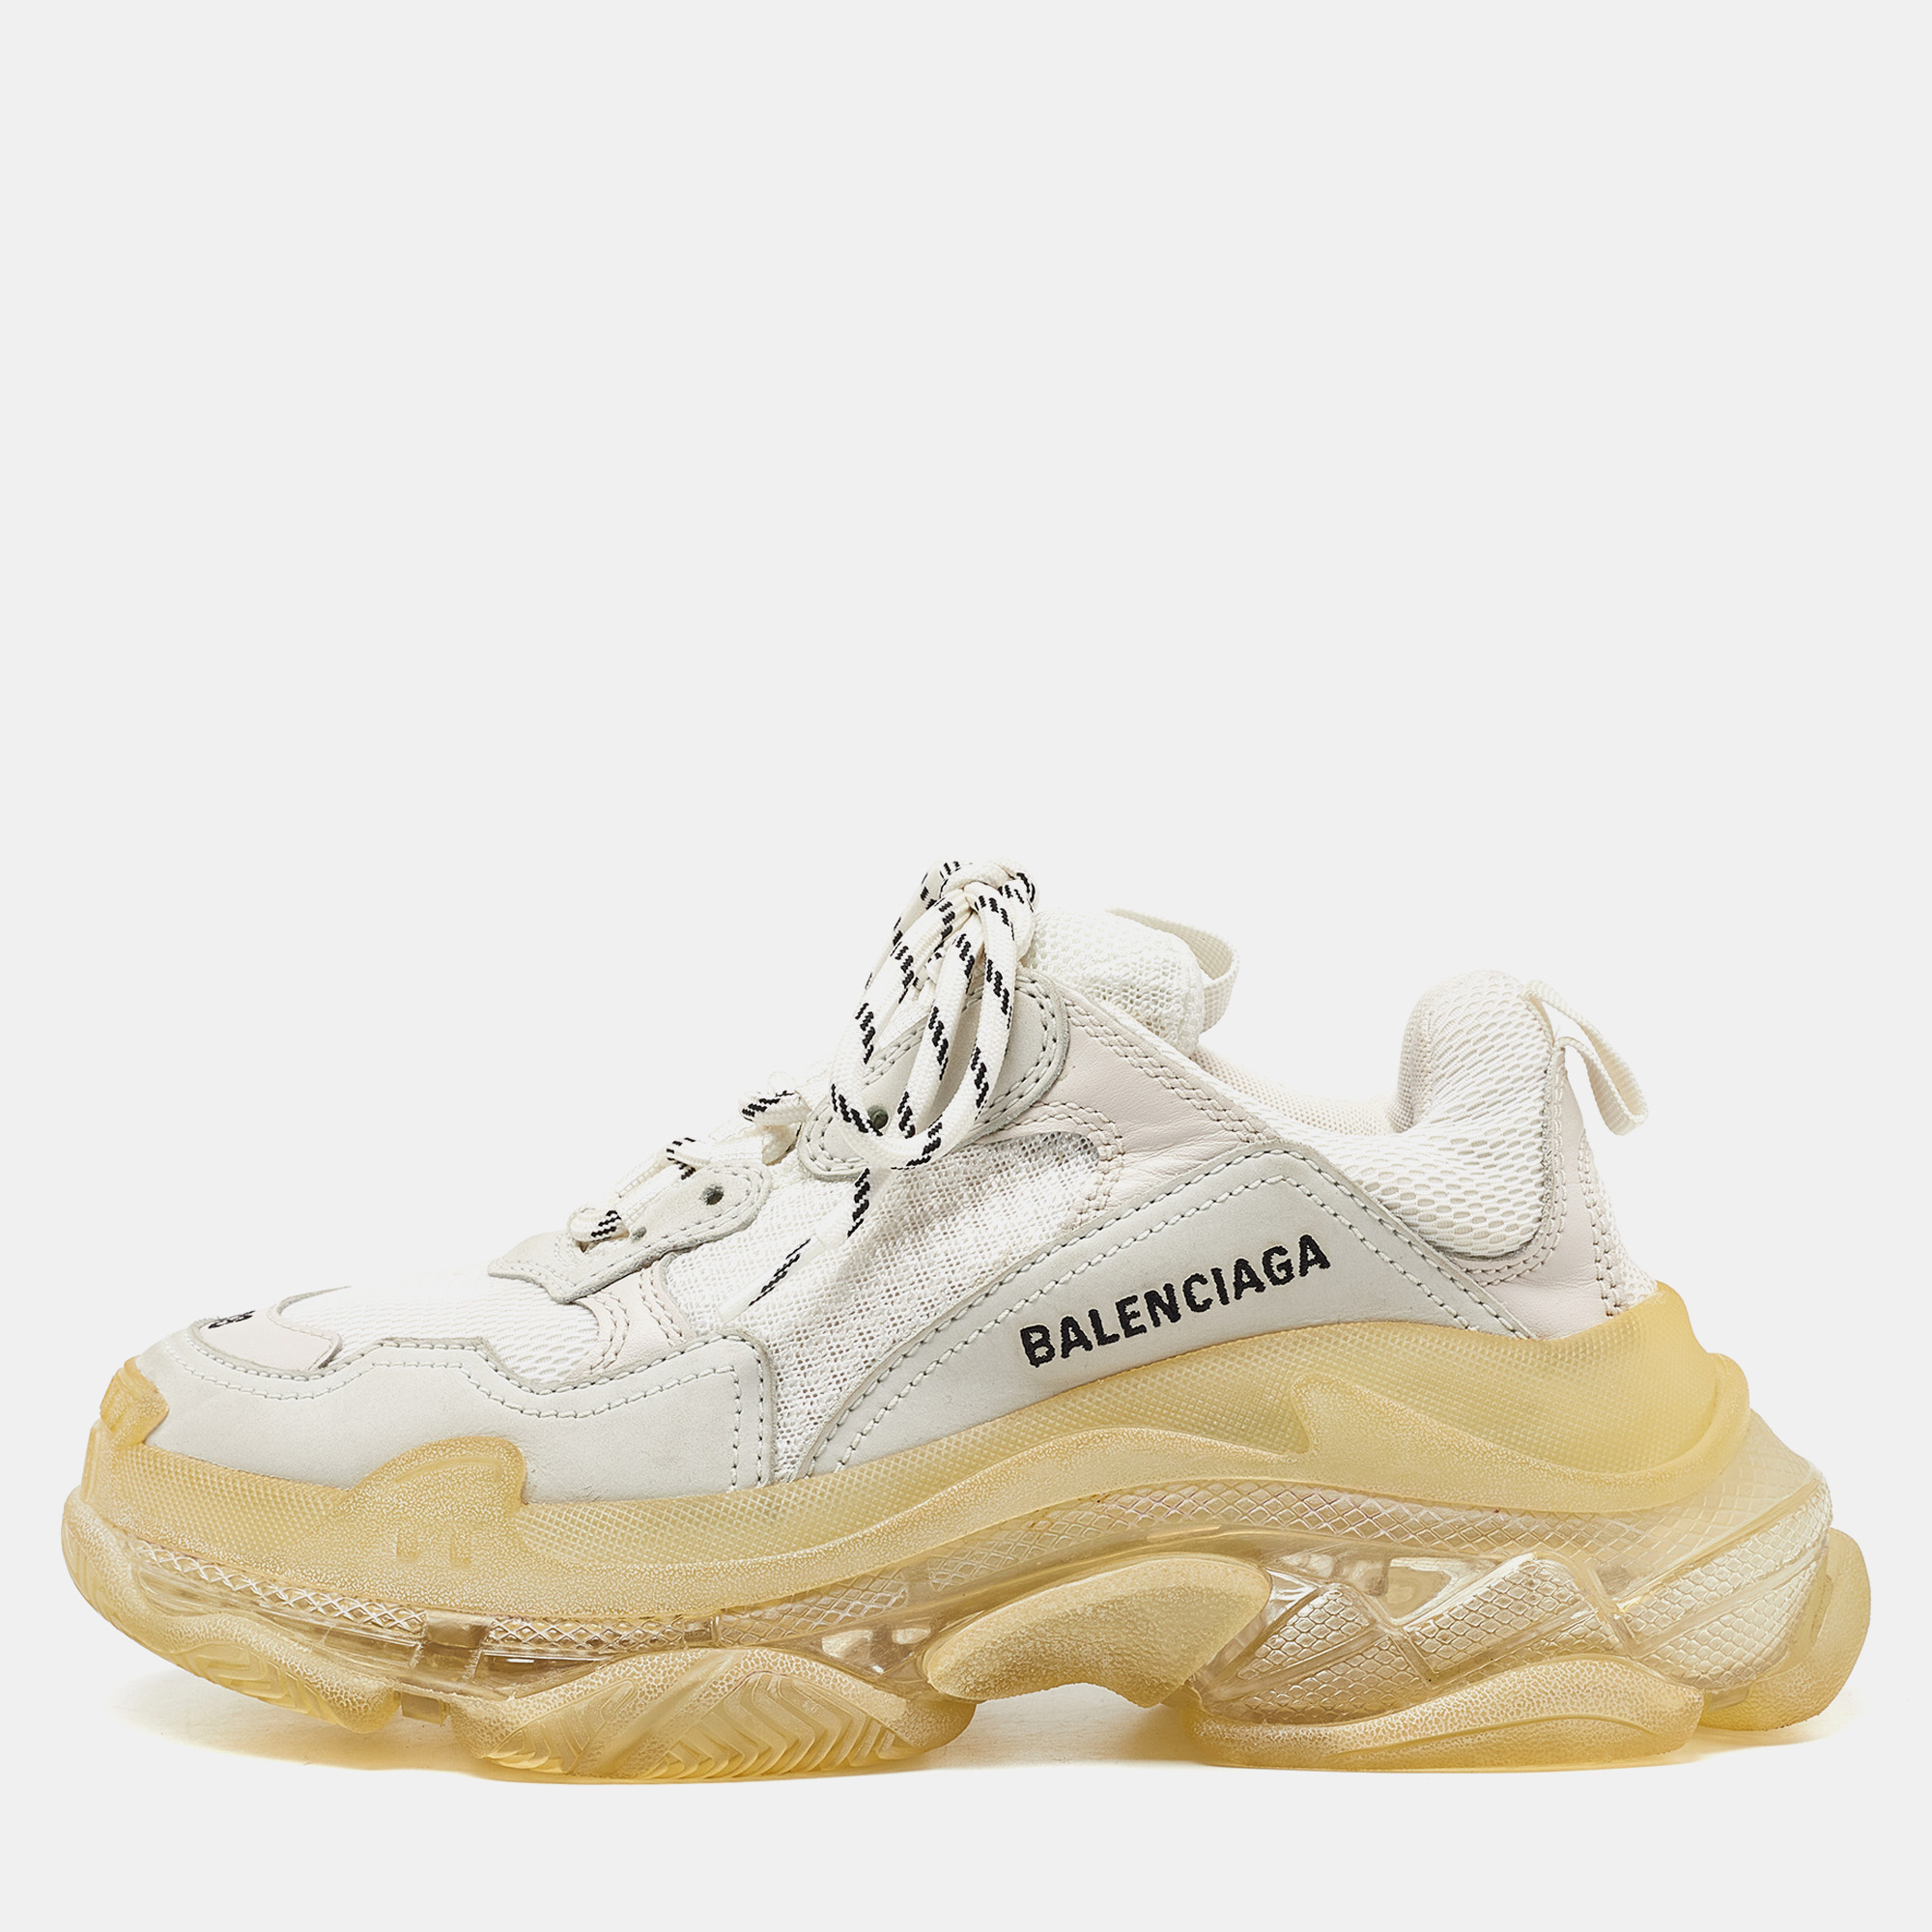 Balenciaga off white leather and mesh triple s clear sneakers size 38